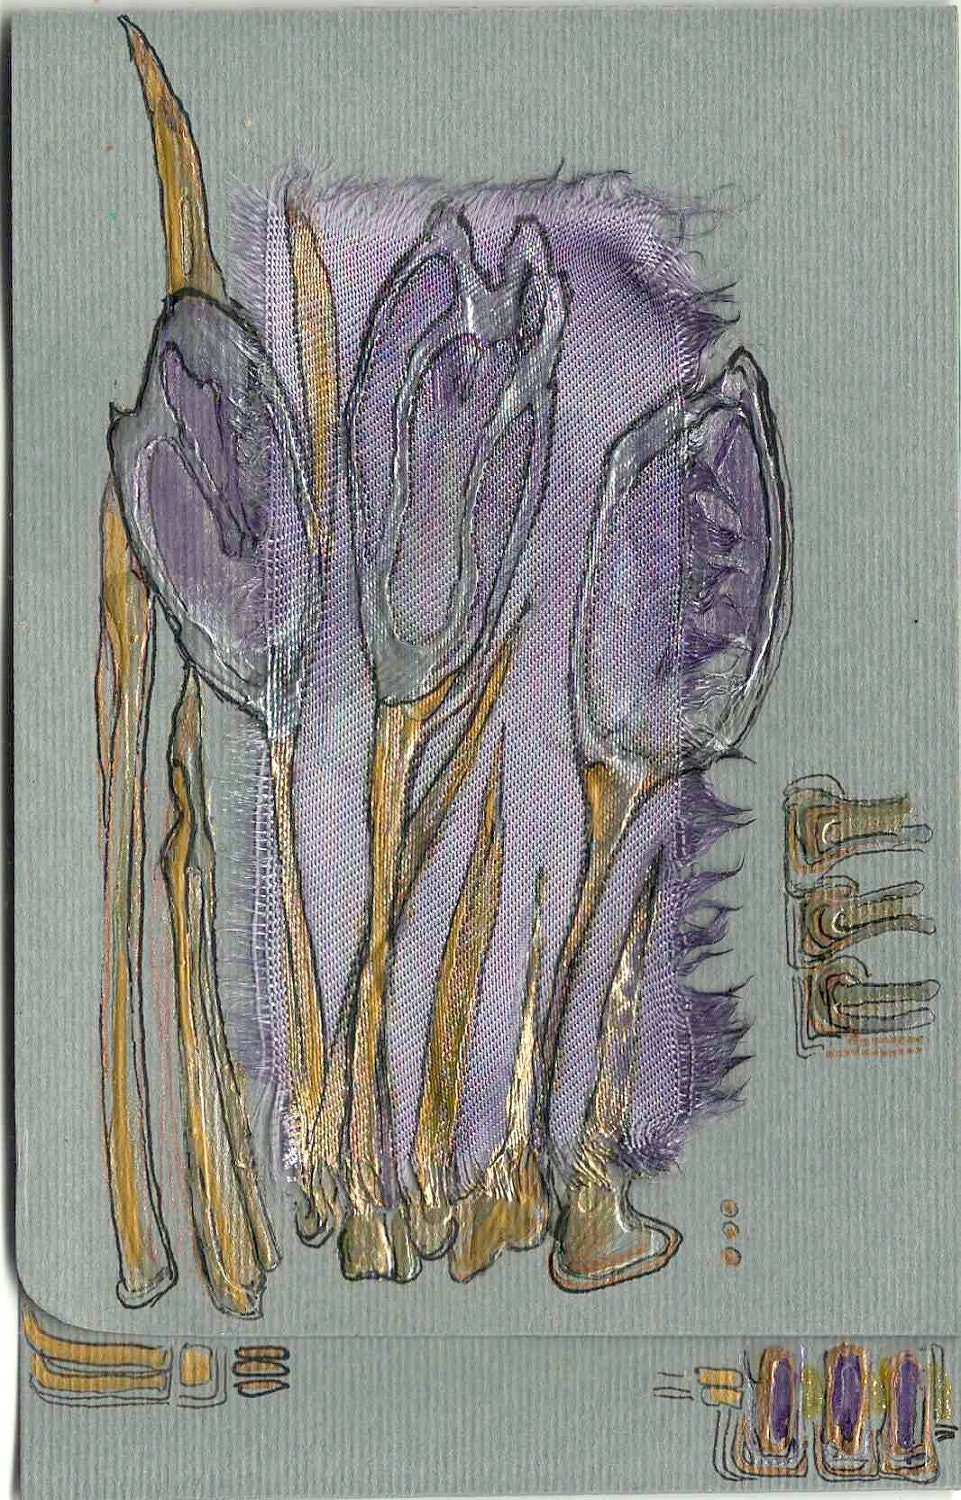 Mauve crocuses - blank greeting card for any occasion